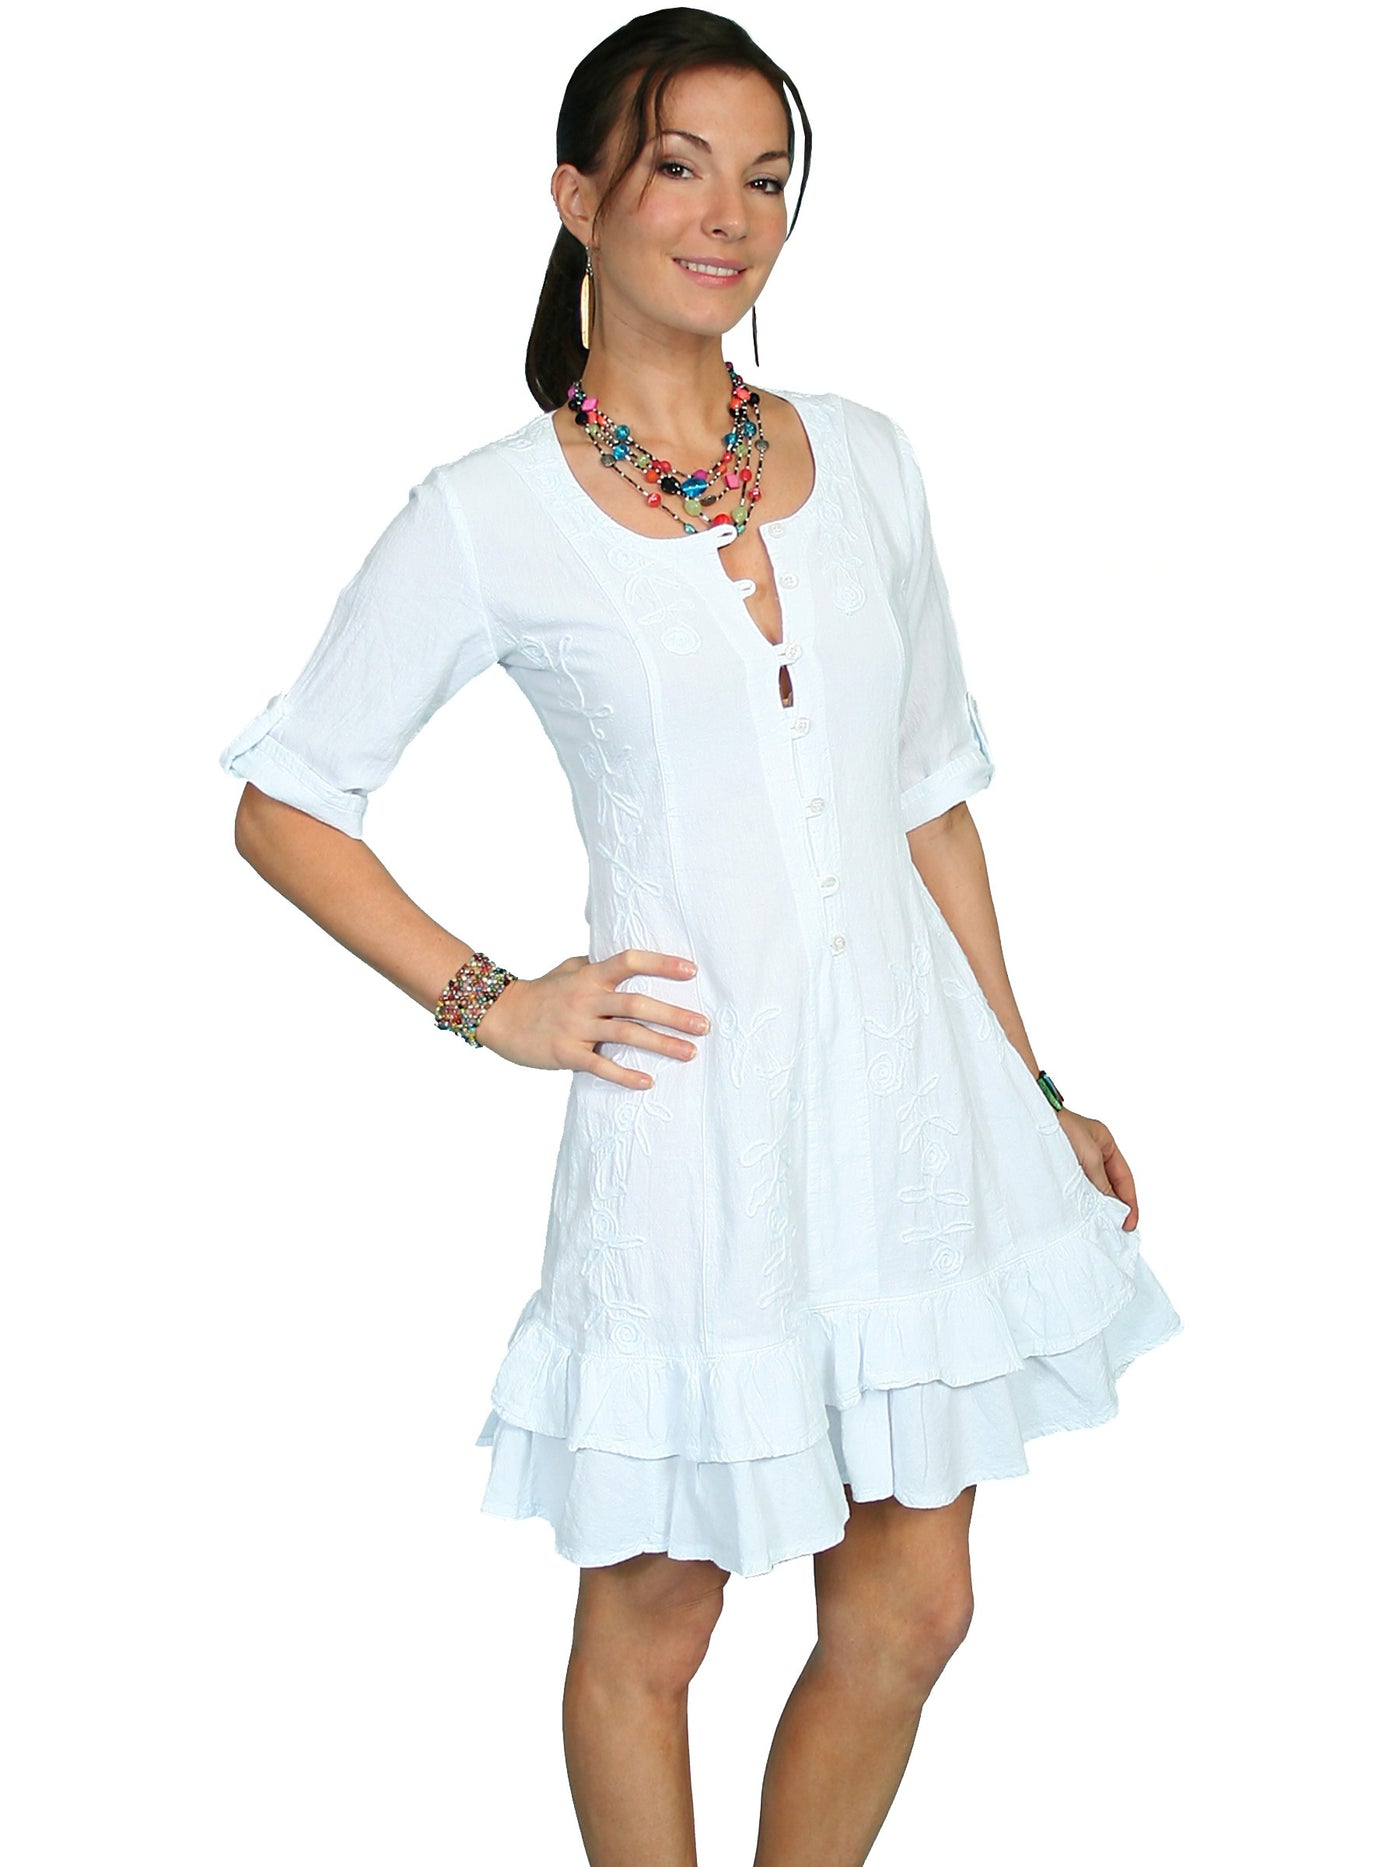 Vintage Style Embroidered Dress in White - SOLD OUT